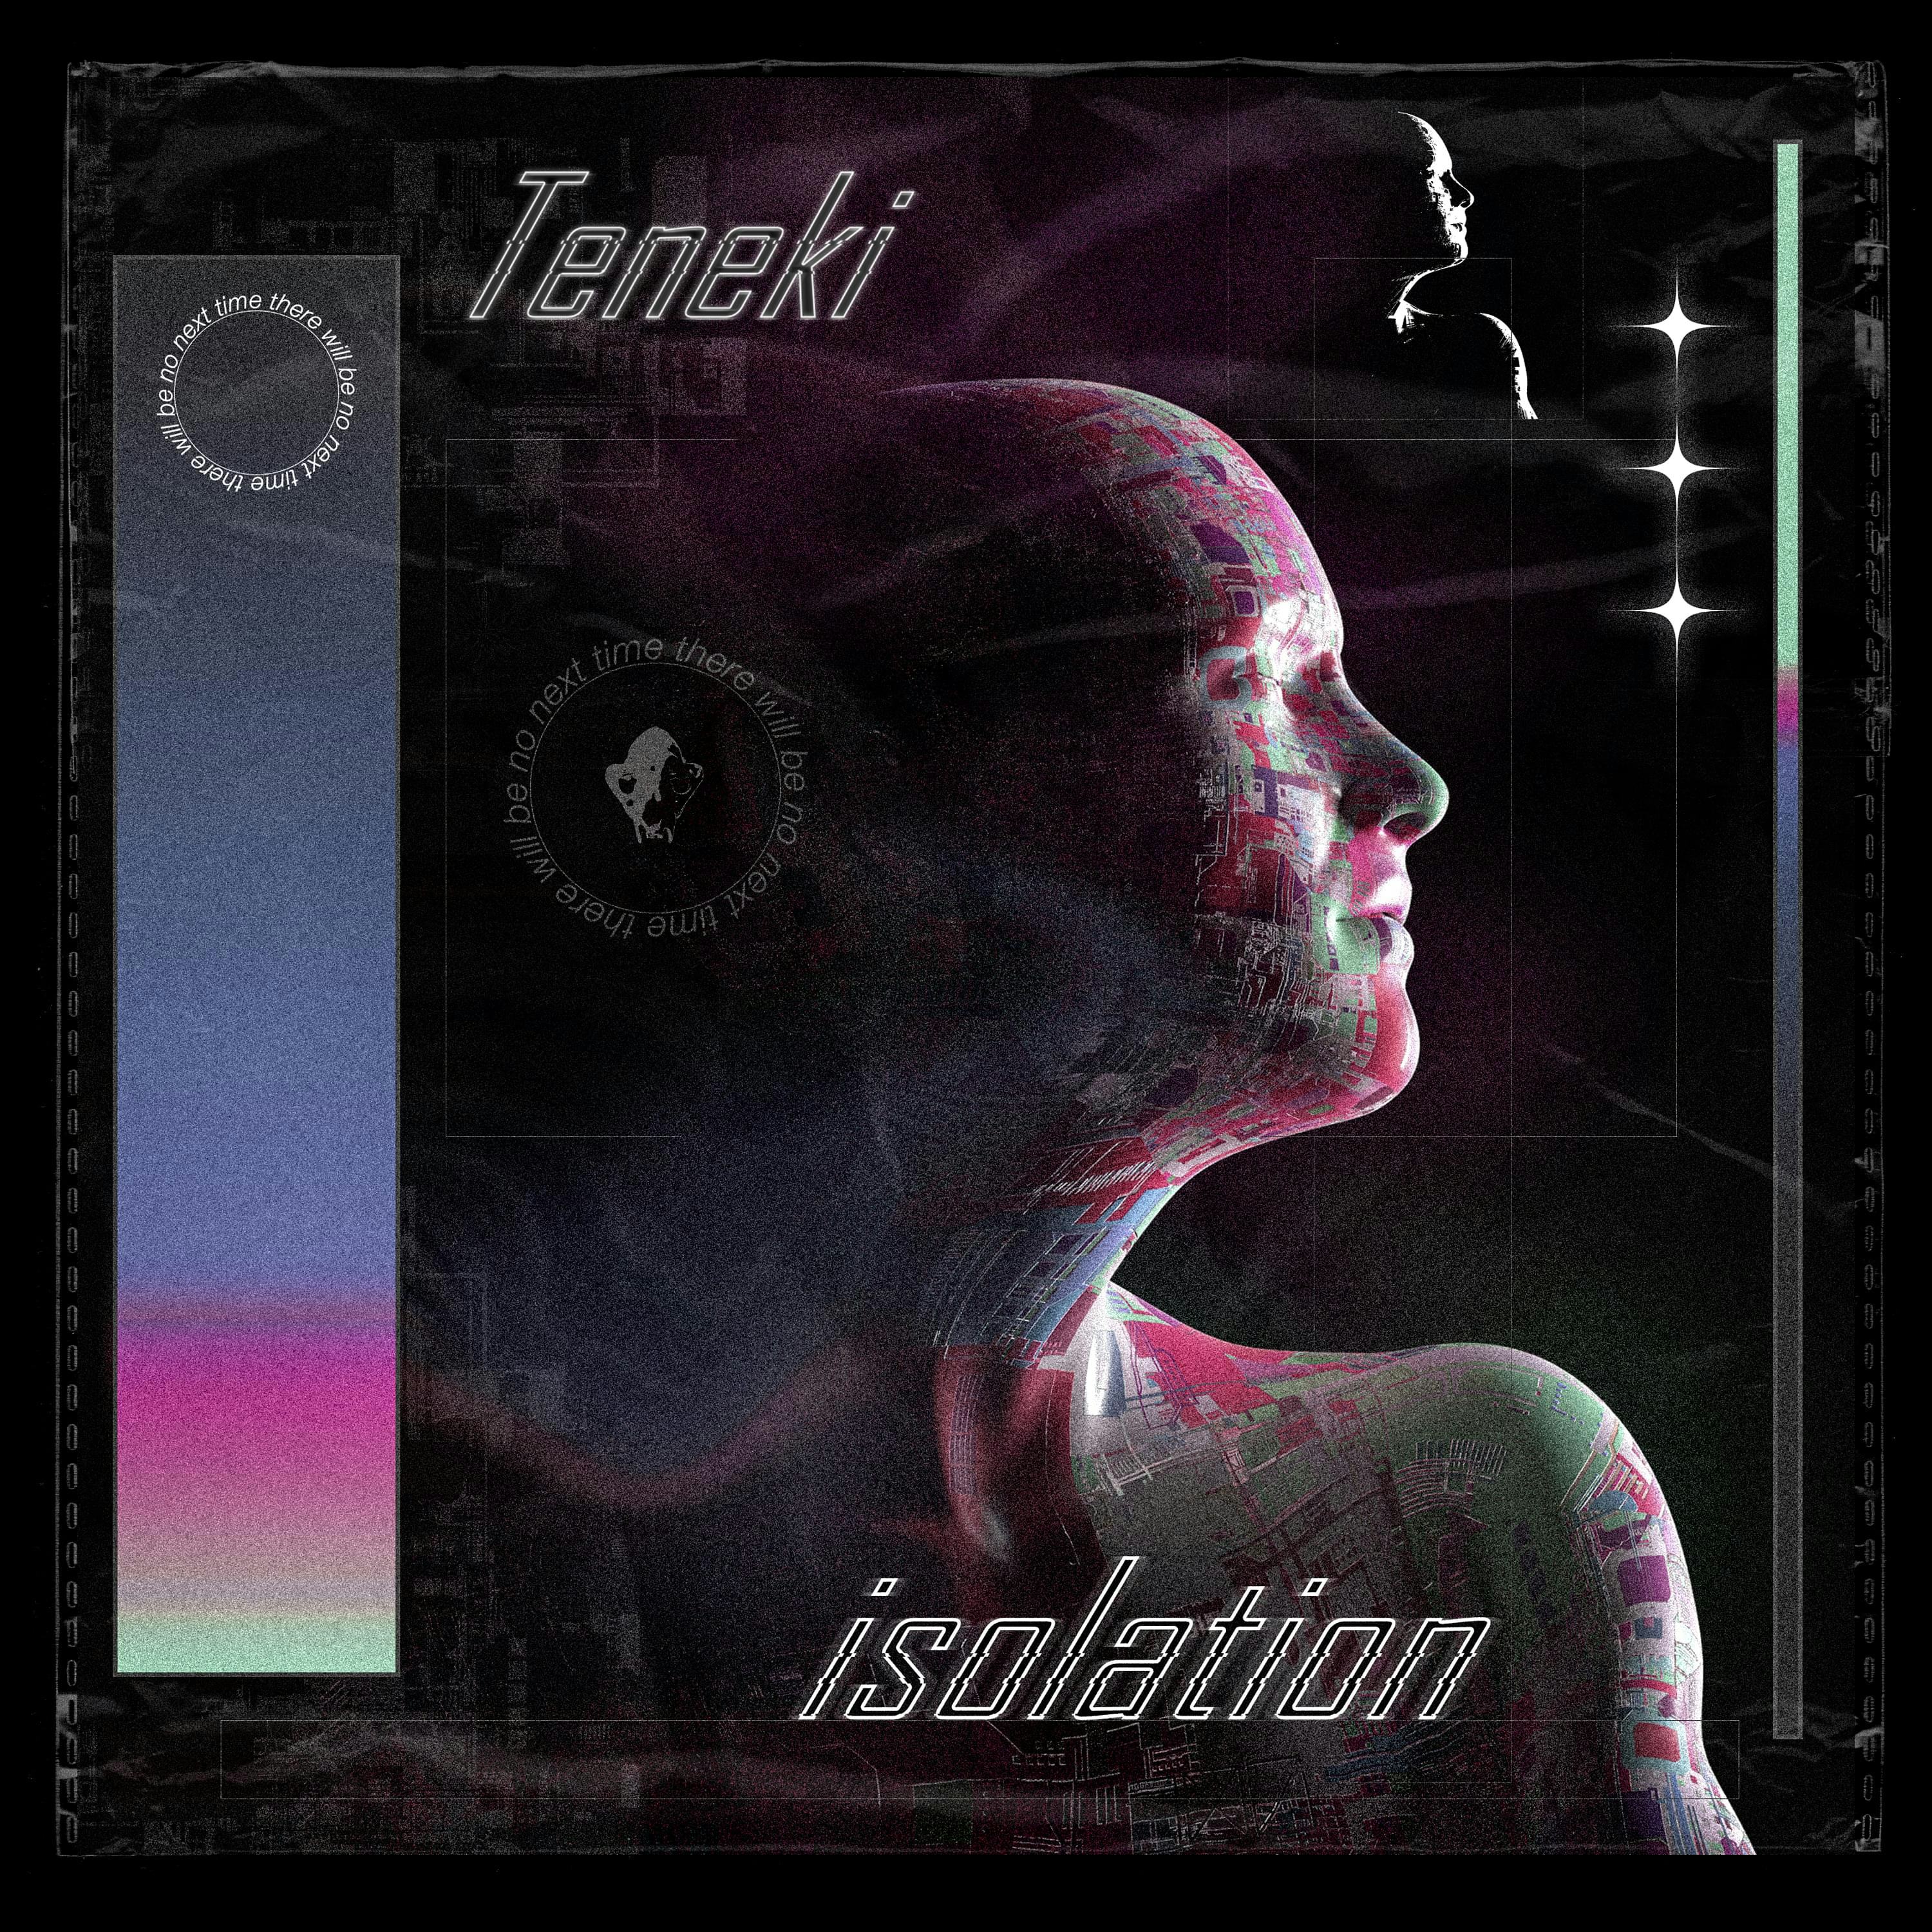 Cover art for ISOLATION by TENEKI